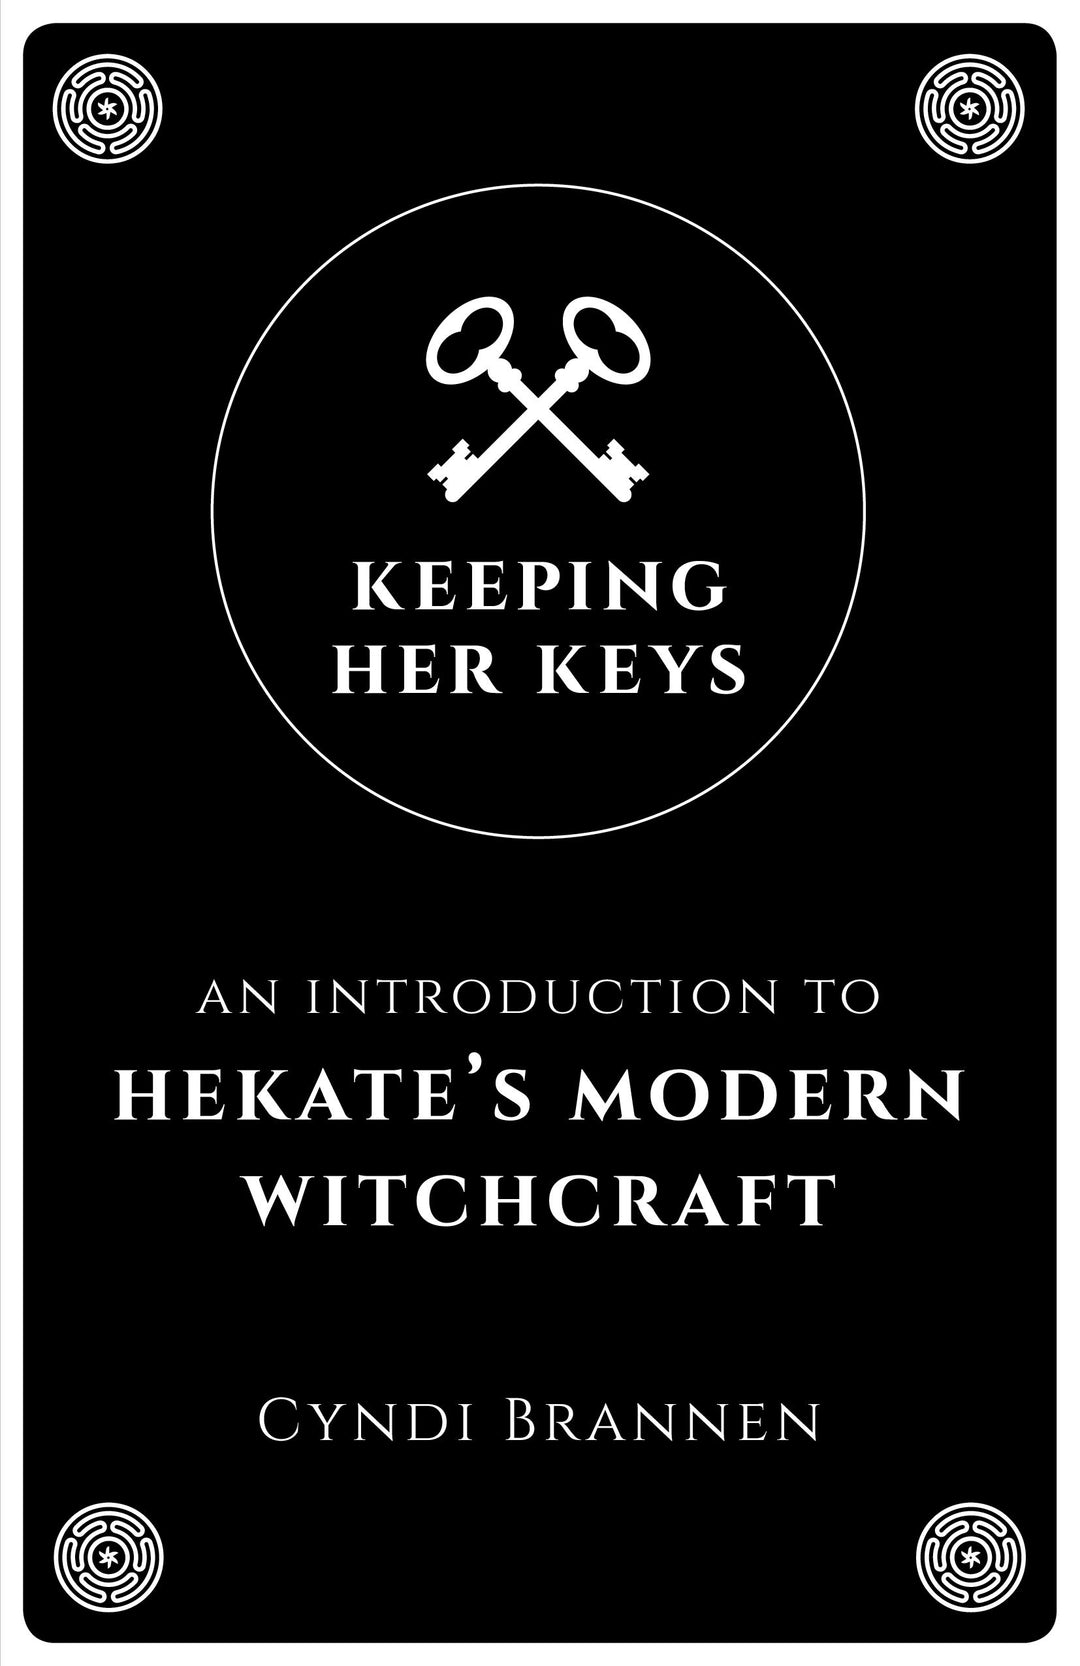 Keeping Her Keys: An Introduction To Hekate's Modern Witchcraft by Cyndi Brannen